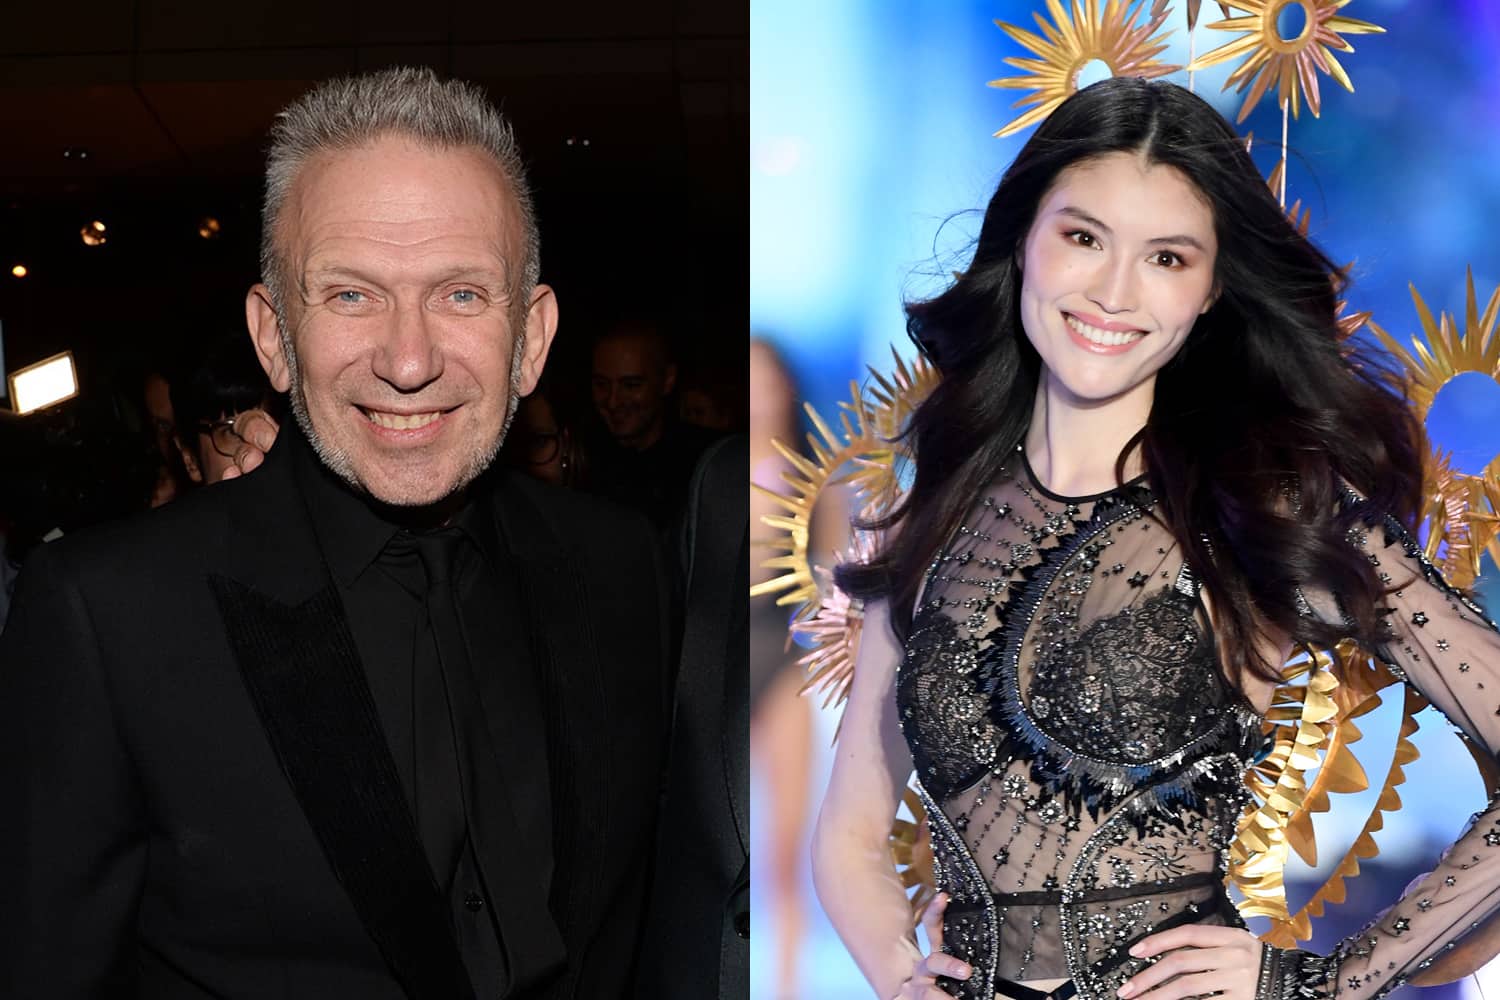 Jean Paul Gaultier becomes latest designer to ban fur from its collections, The Independent